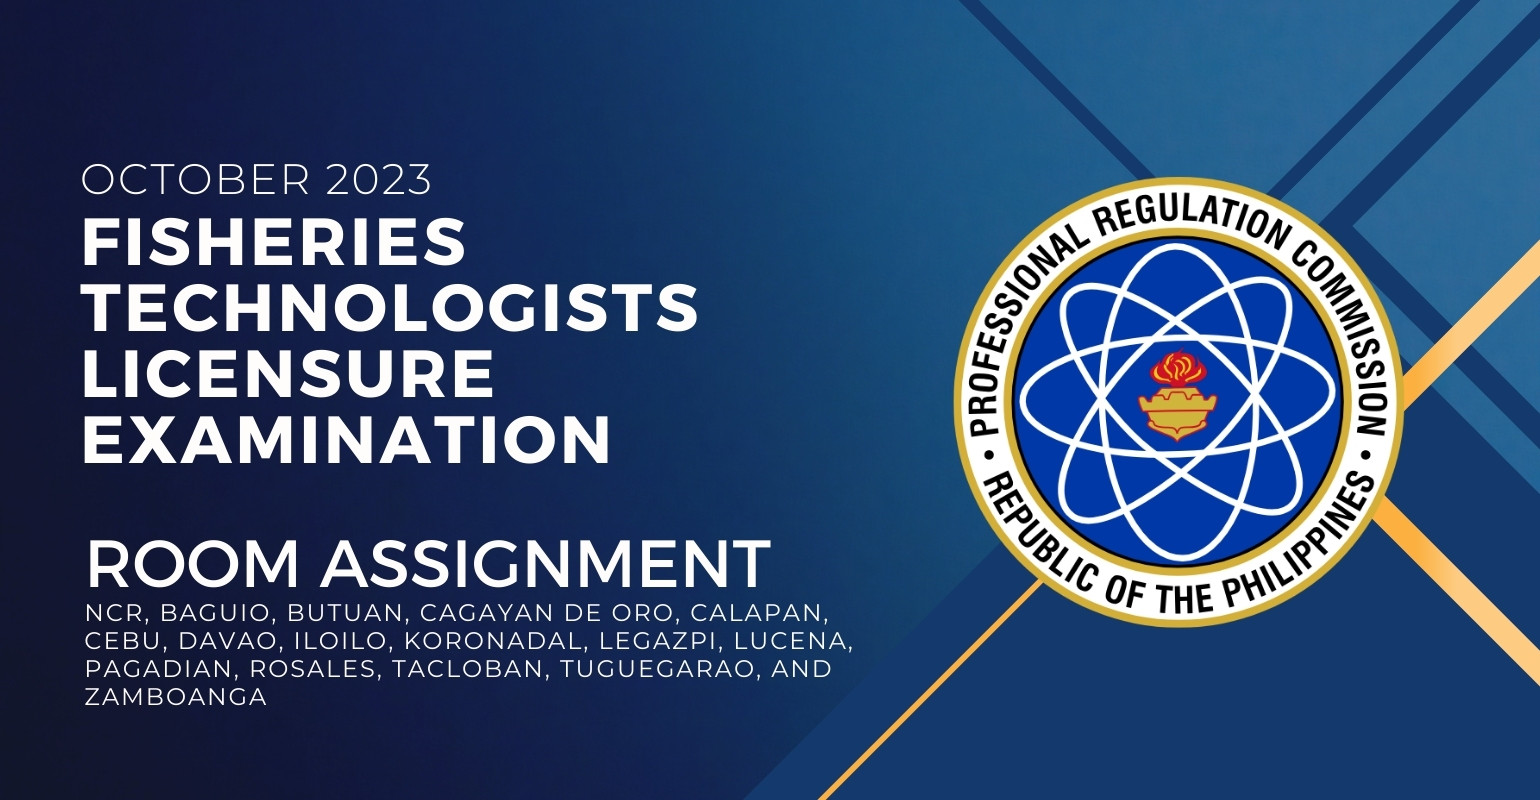 Room Assignment — October 2023 Fisheries Technologists Licensure Exam